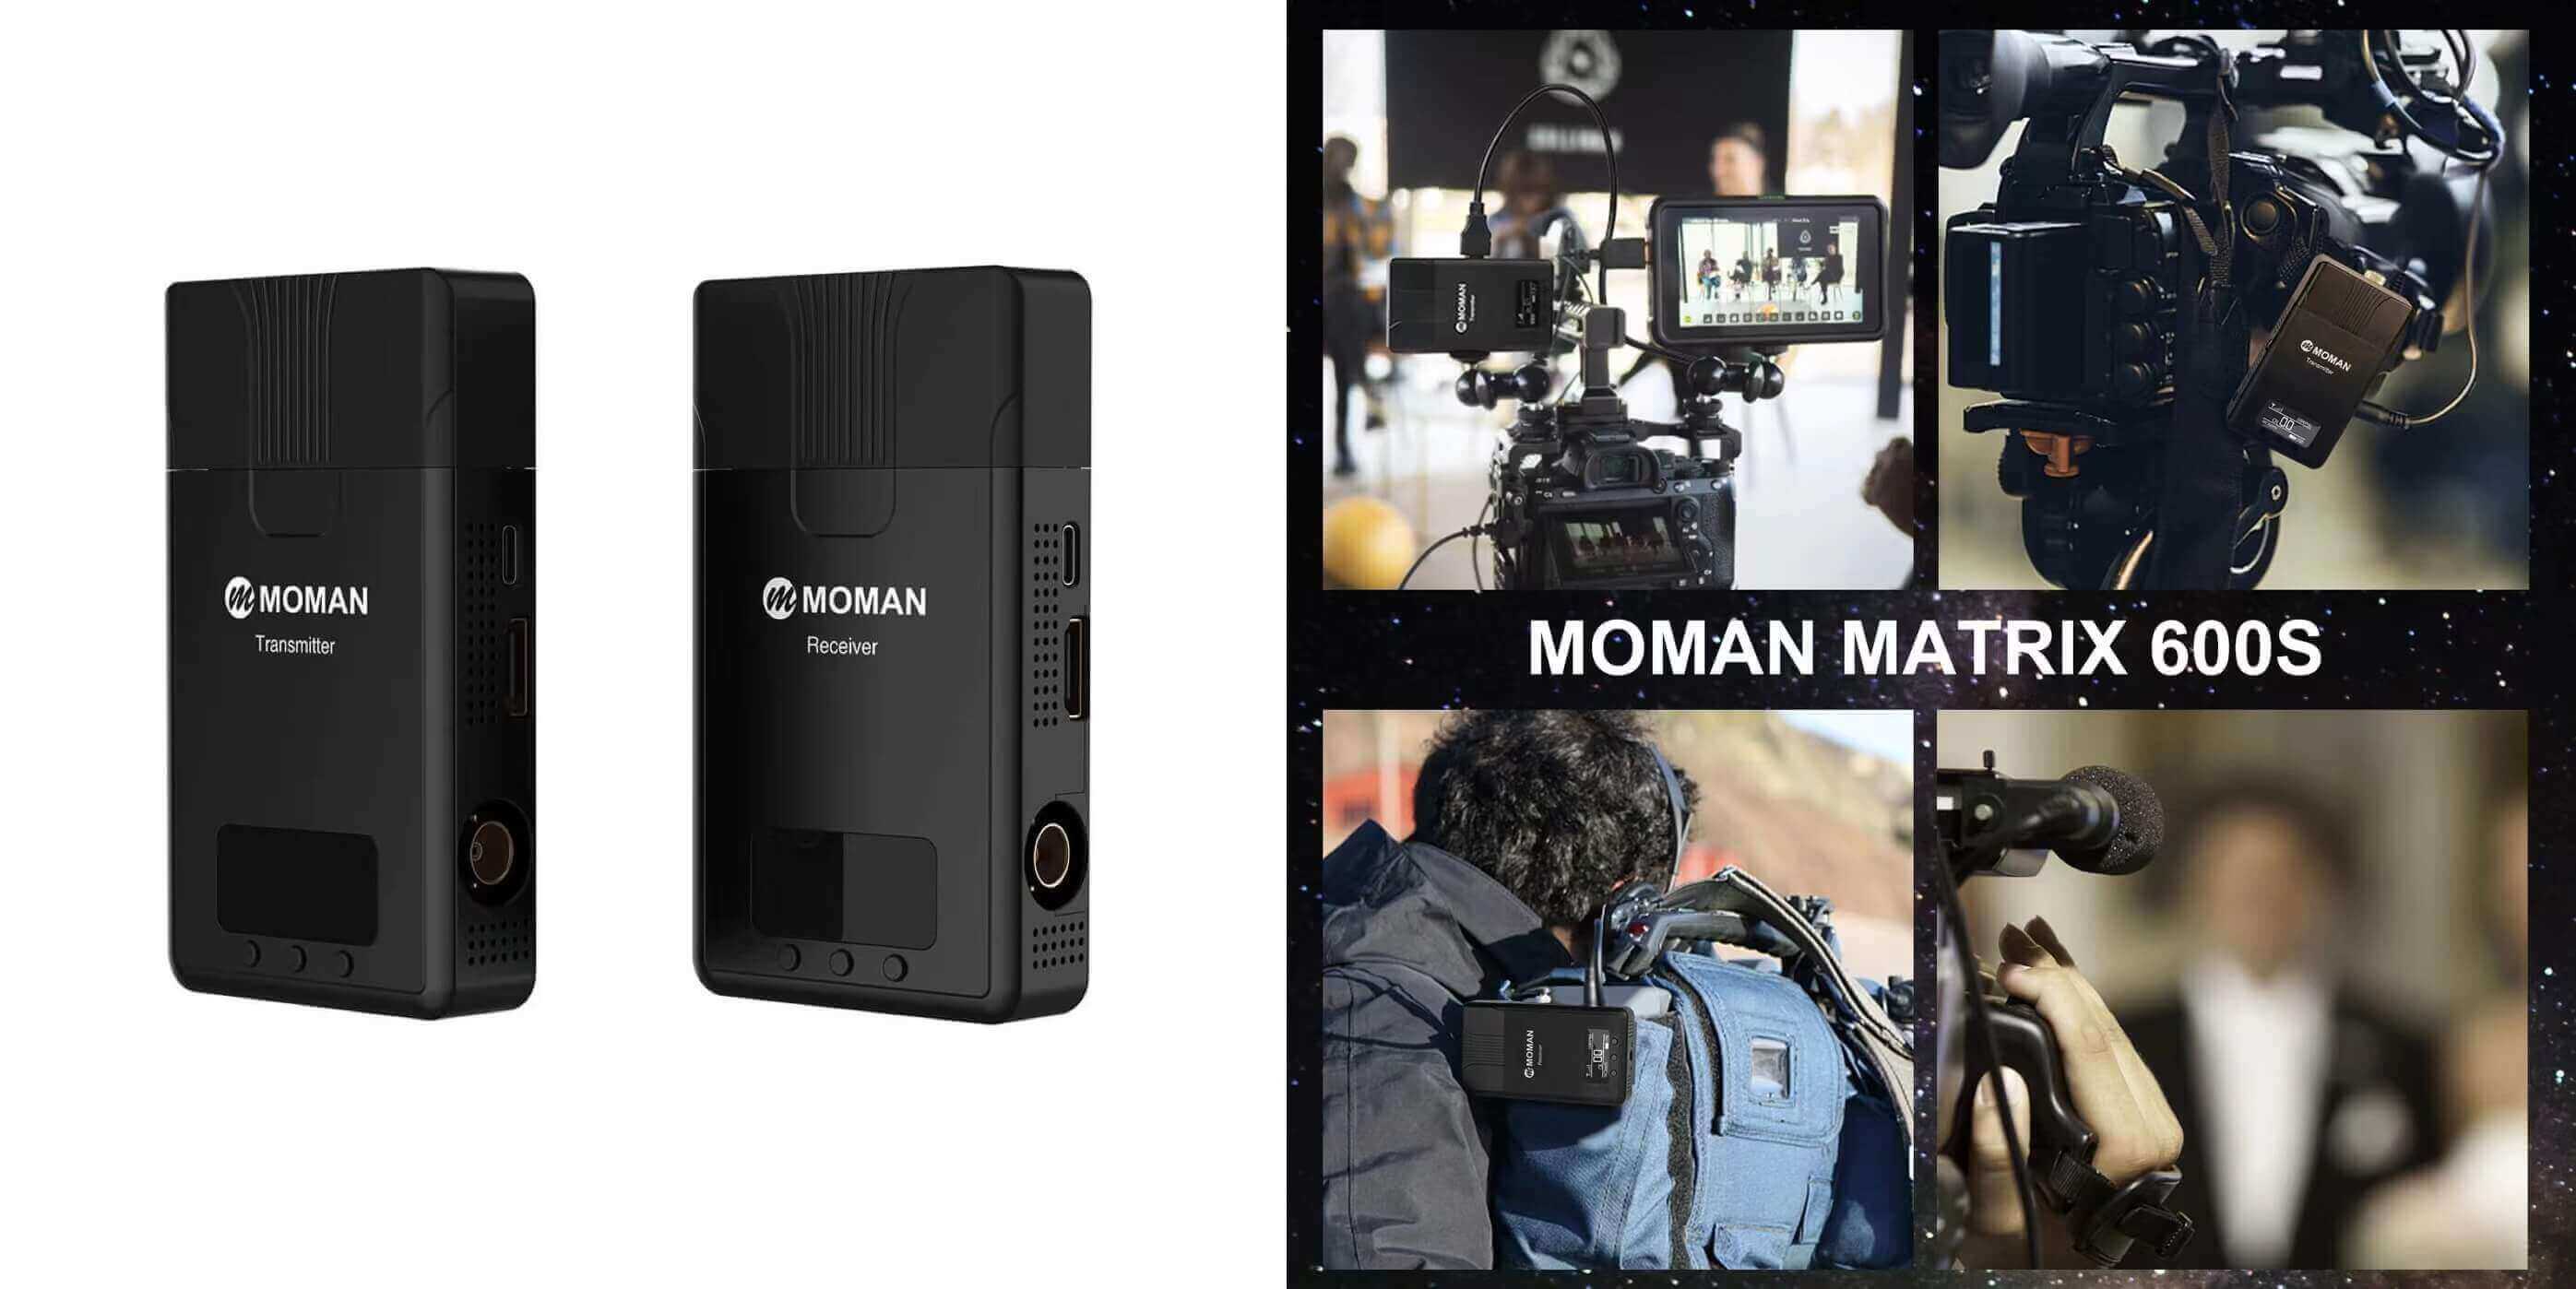 Moman 600s wireless transmission system supports real-time monitoring